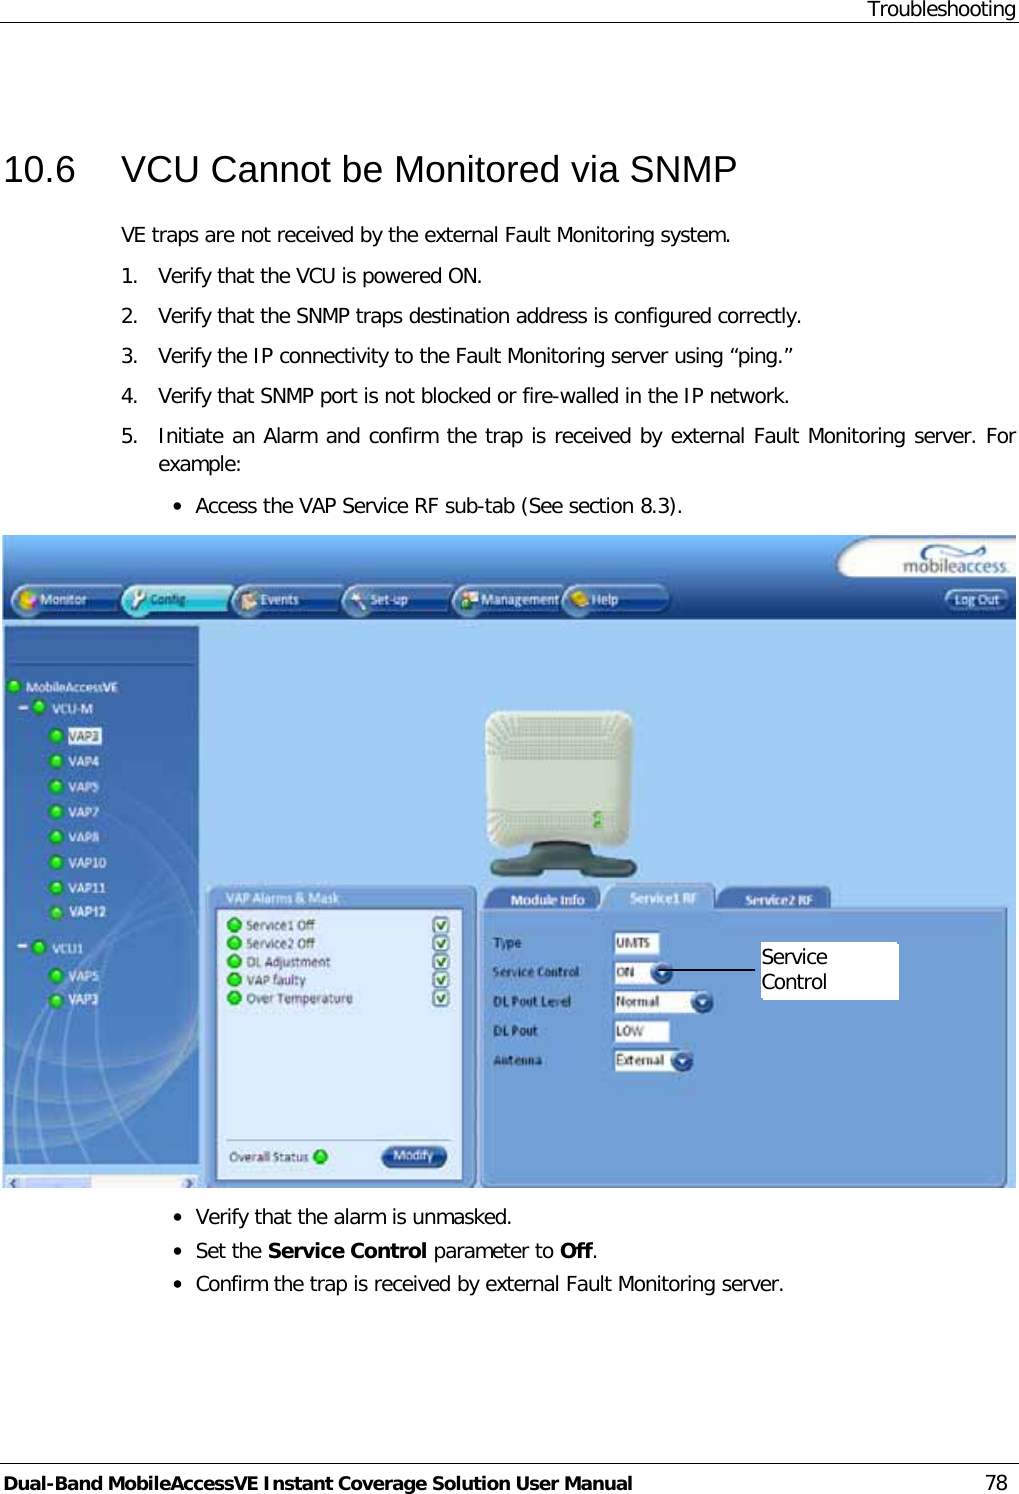 Troubleshooting Dual-Band MobileAccessVE Instant Coverage Solution User Manual 78  10.6  VCU Cannot be Monitored via SNMP VE traps are not received by the external Fault Monitoring system. 1.  Verify that the VCU is powered ON. 2.  Verify that the SNMP traps destination address is configured correctly. 3.  Verify the IP connectivity to the Fault Monitoring server using “ping.” 4.  Verify that SNMP port is not blocked or fire-walled in the IP network. 5.  Initiate an Alarm and confirm the trap is received by external Fault Monitoring server. For example: · Access the VAP Service RF sub-tab (See section  8.3).  · Verify that the alarm is unmasked. · Set the Service Control parameter to Off. · Confirm the trap is received by external Fault Monitoring server.  Service Control   